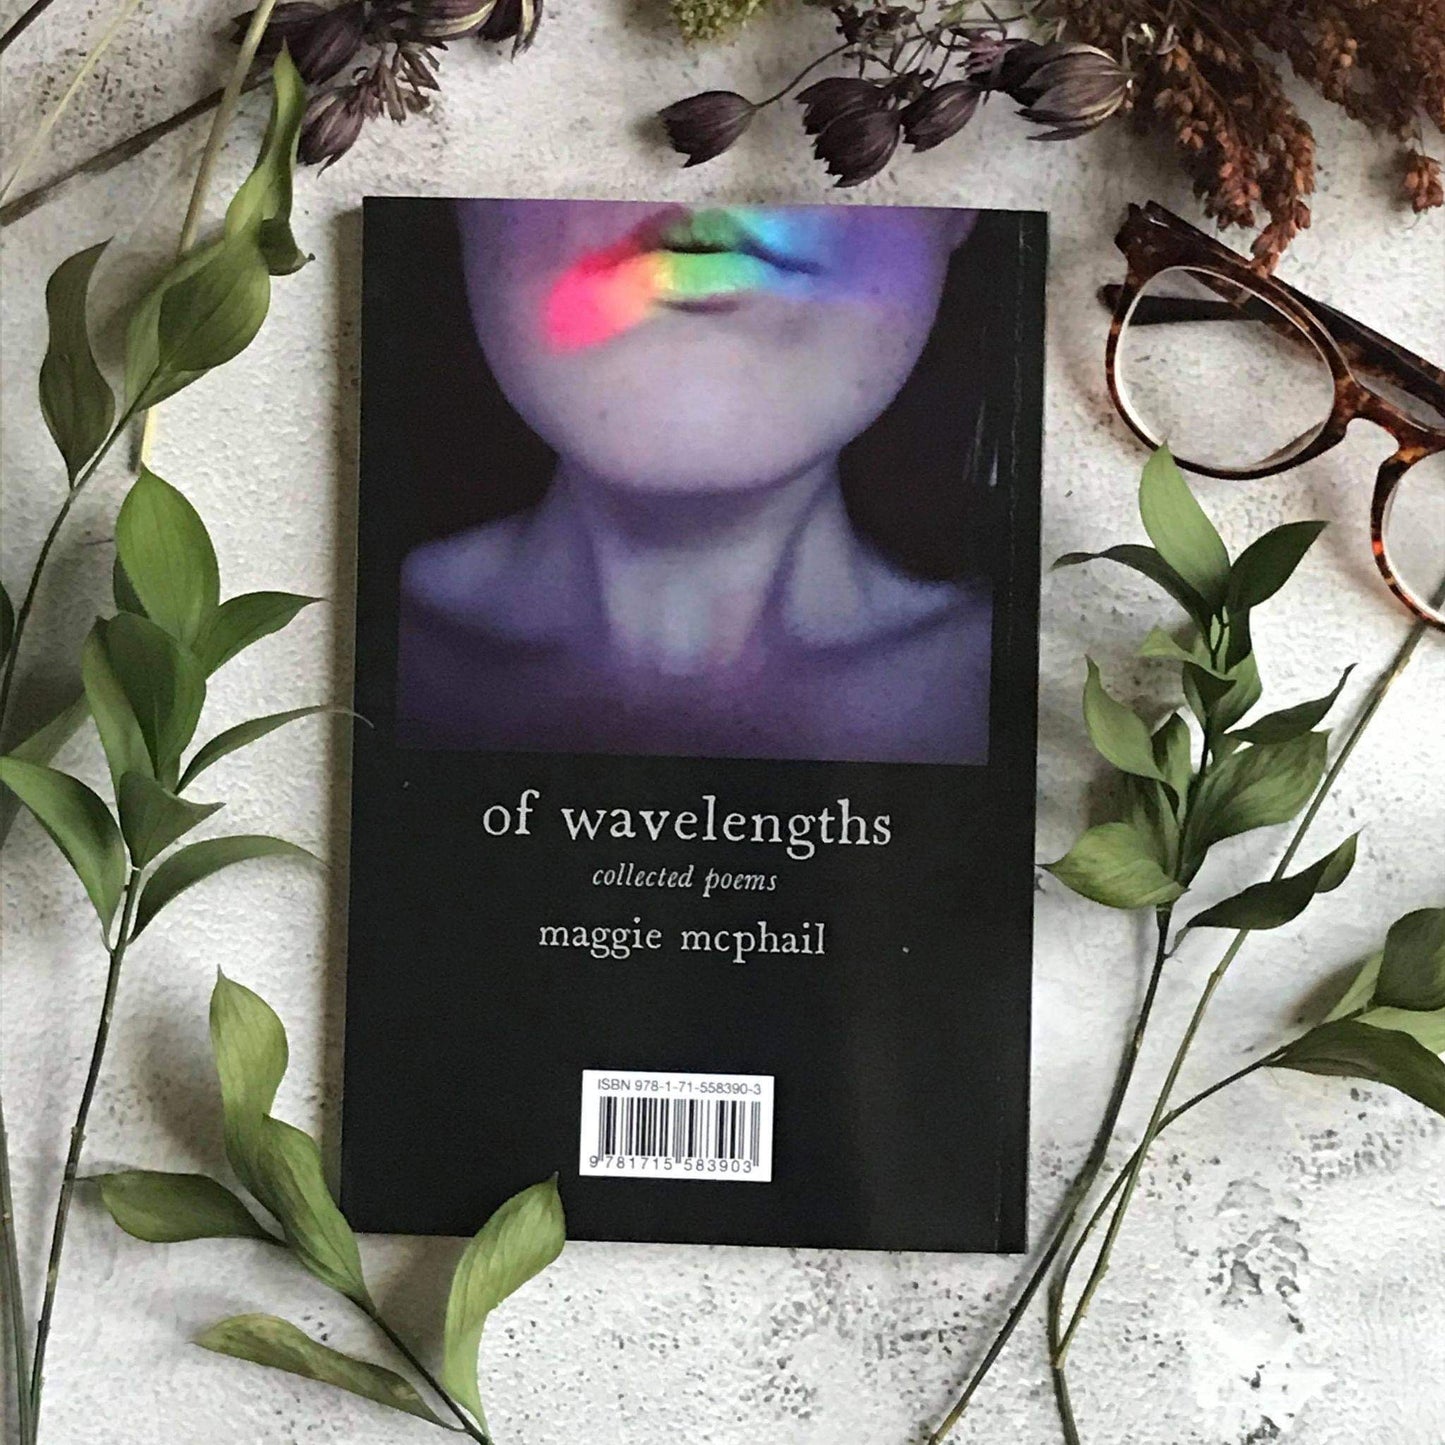 of wavelengths - collected poems by maggie mcphail